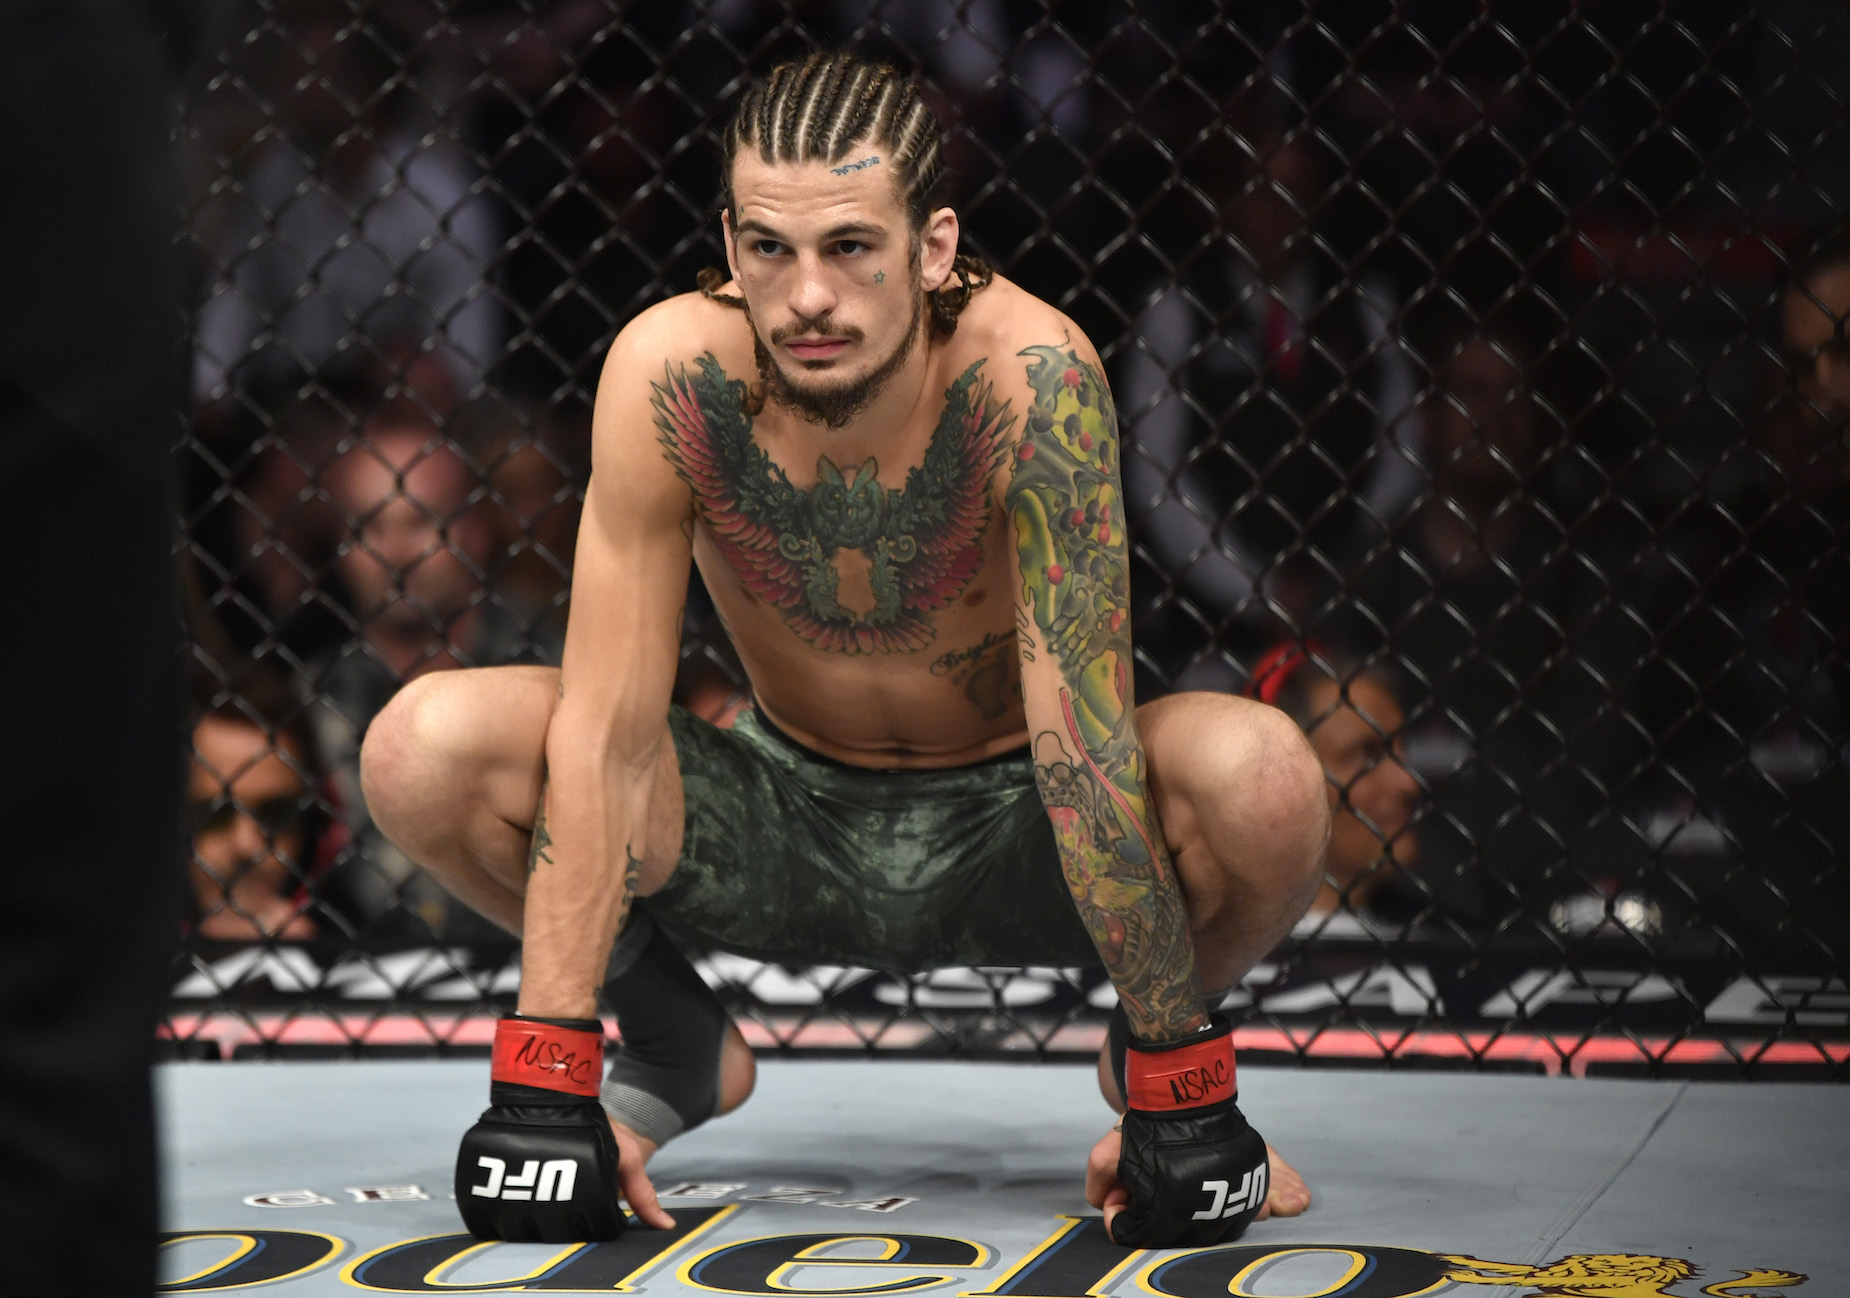 Sean O'Malley might be using his hair to play mind games with Marlon Vera.